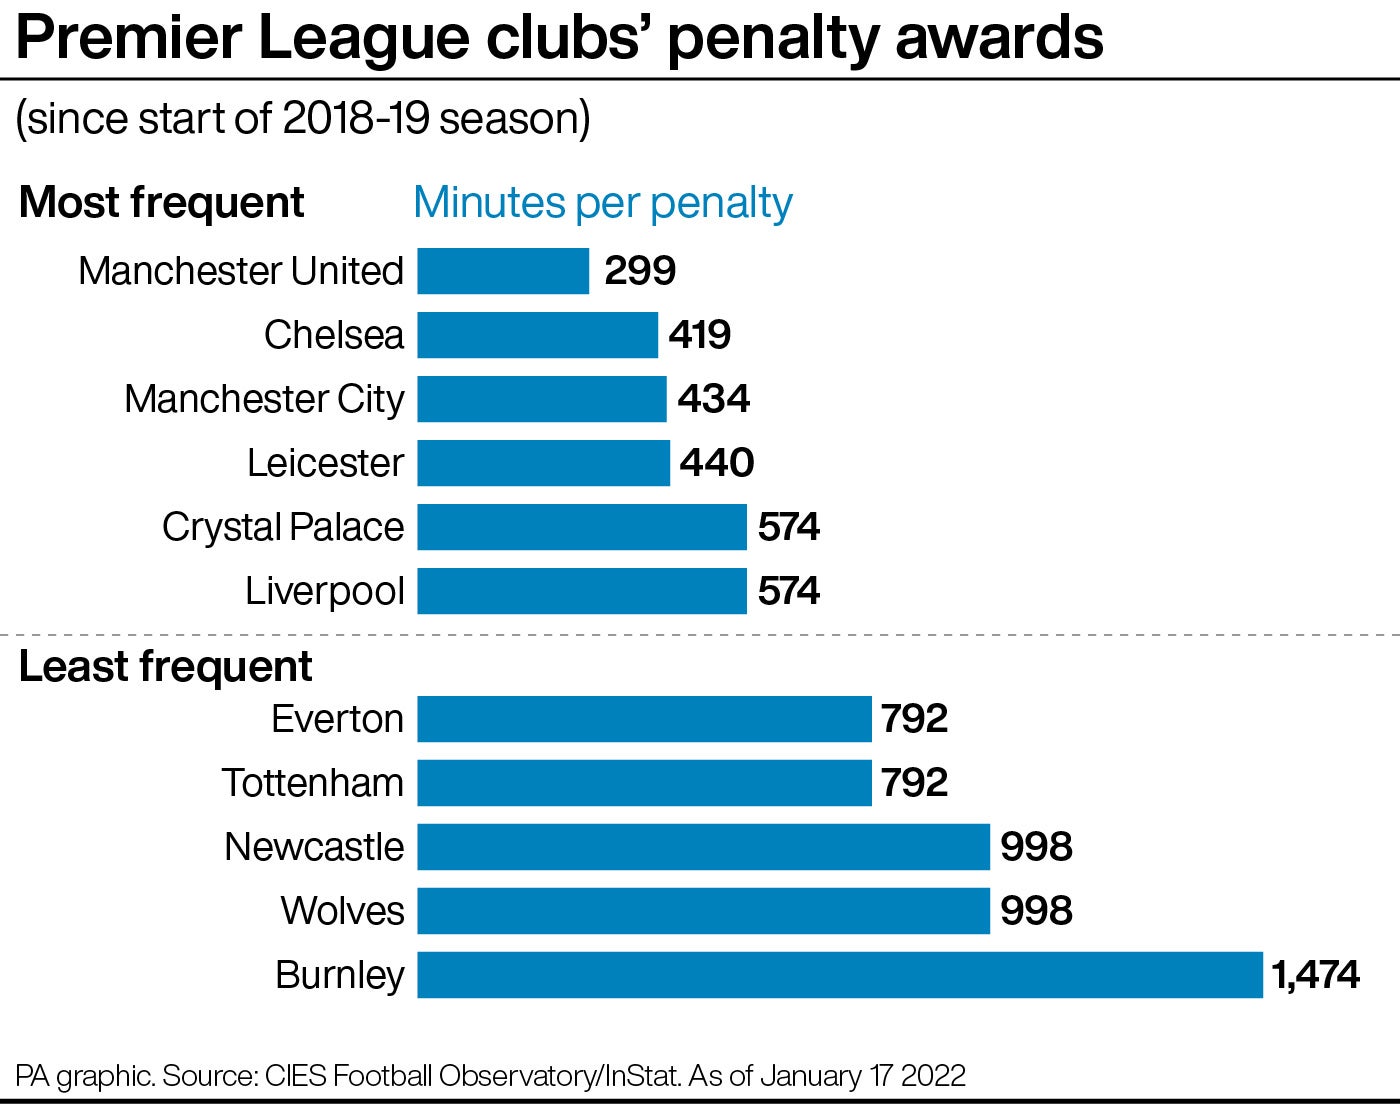 Manchester United earn penalties far more often than any other Premier League club (PA graphic)